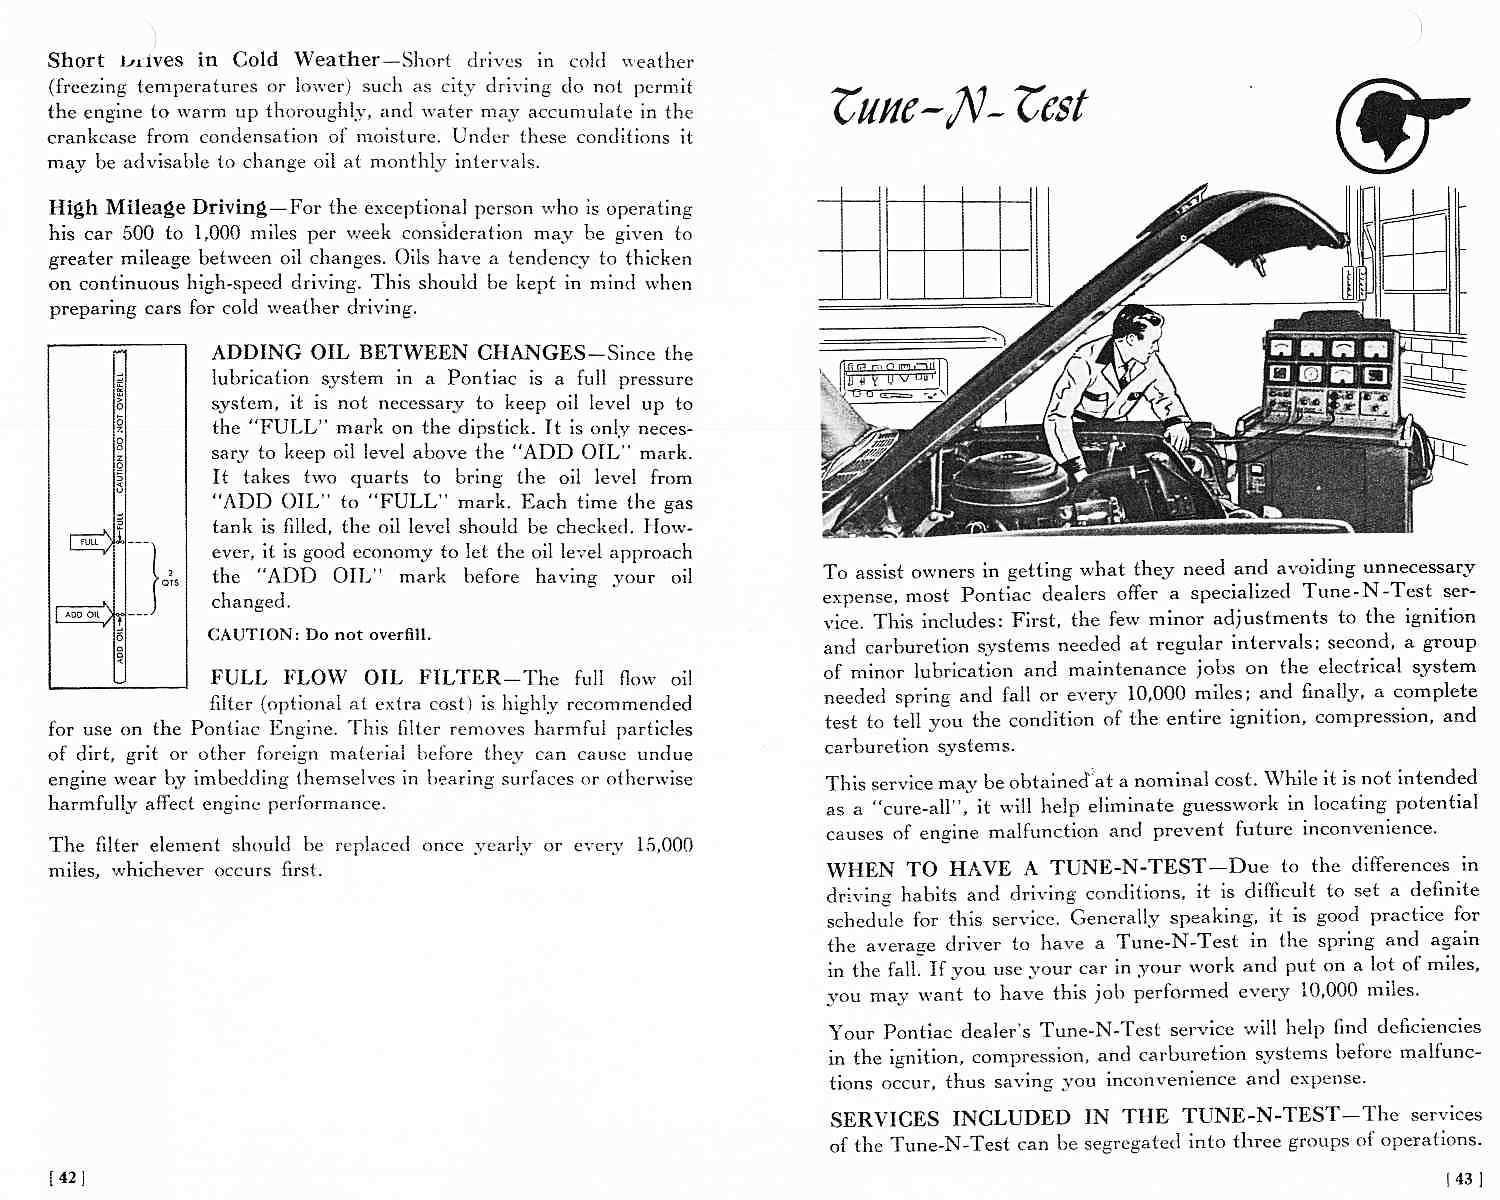 1956_Pontiac_Owners_Guide-42-43